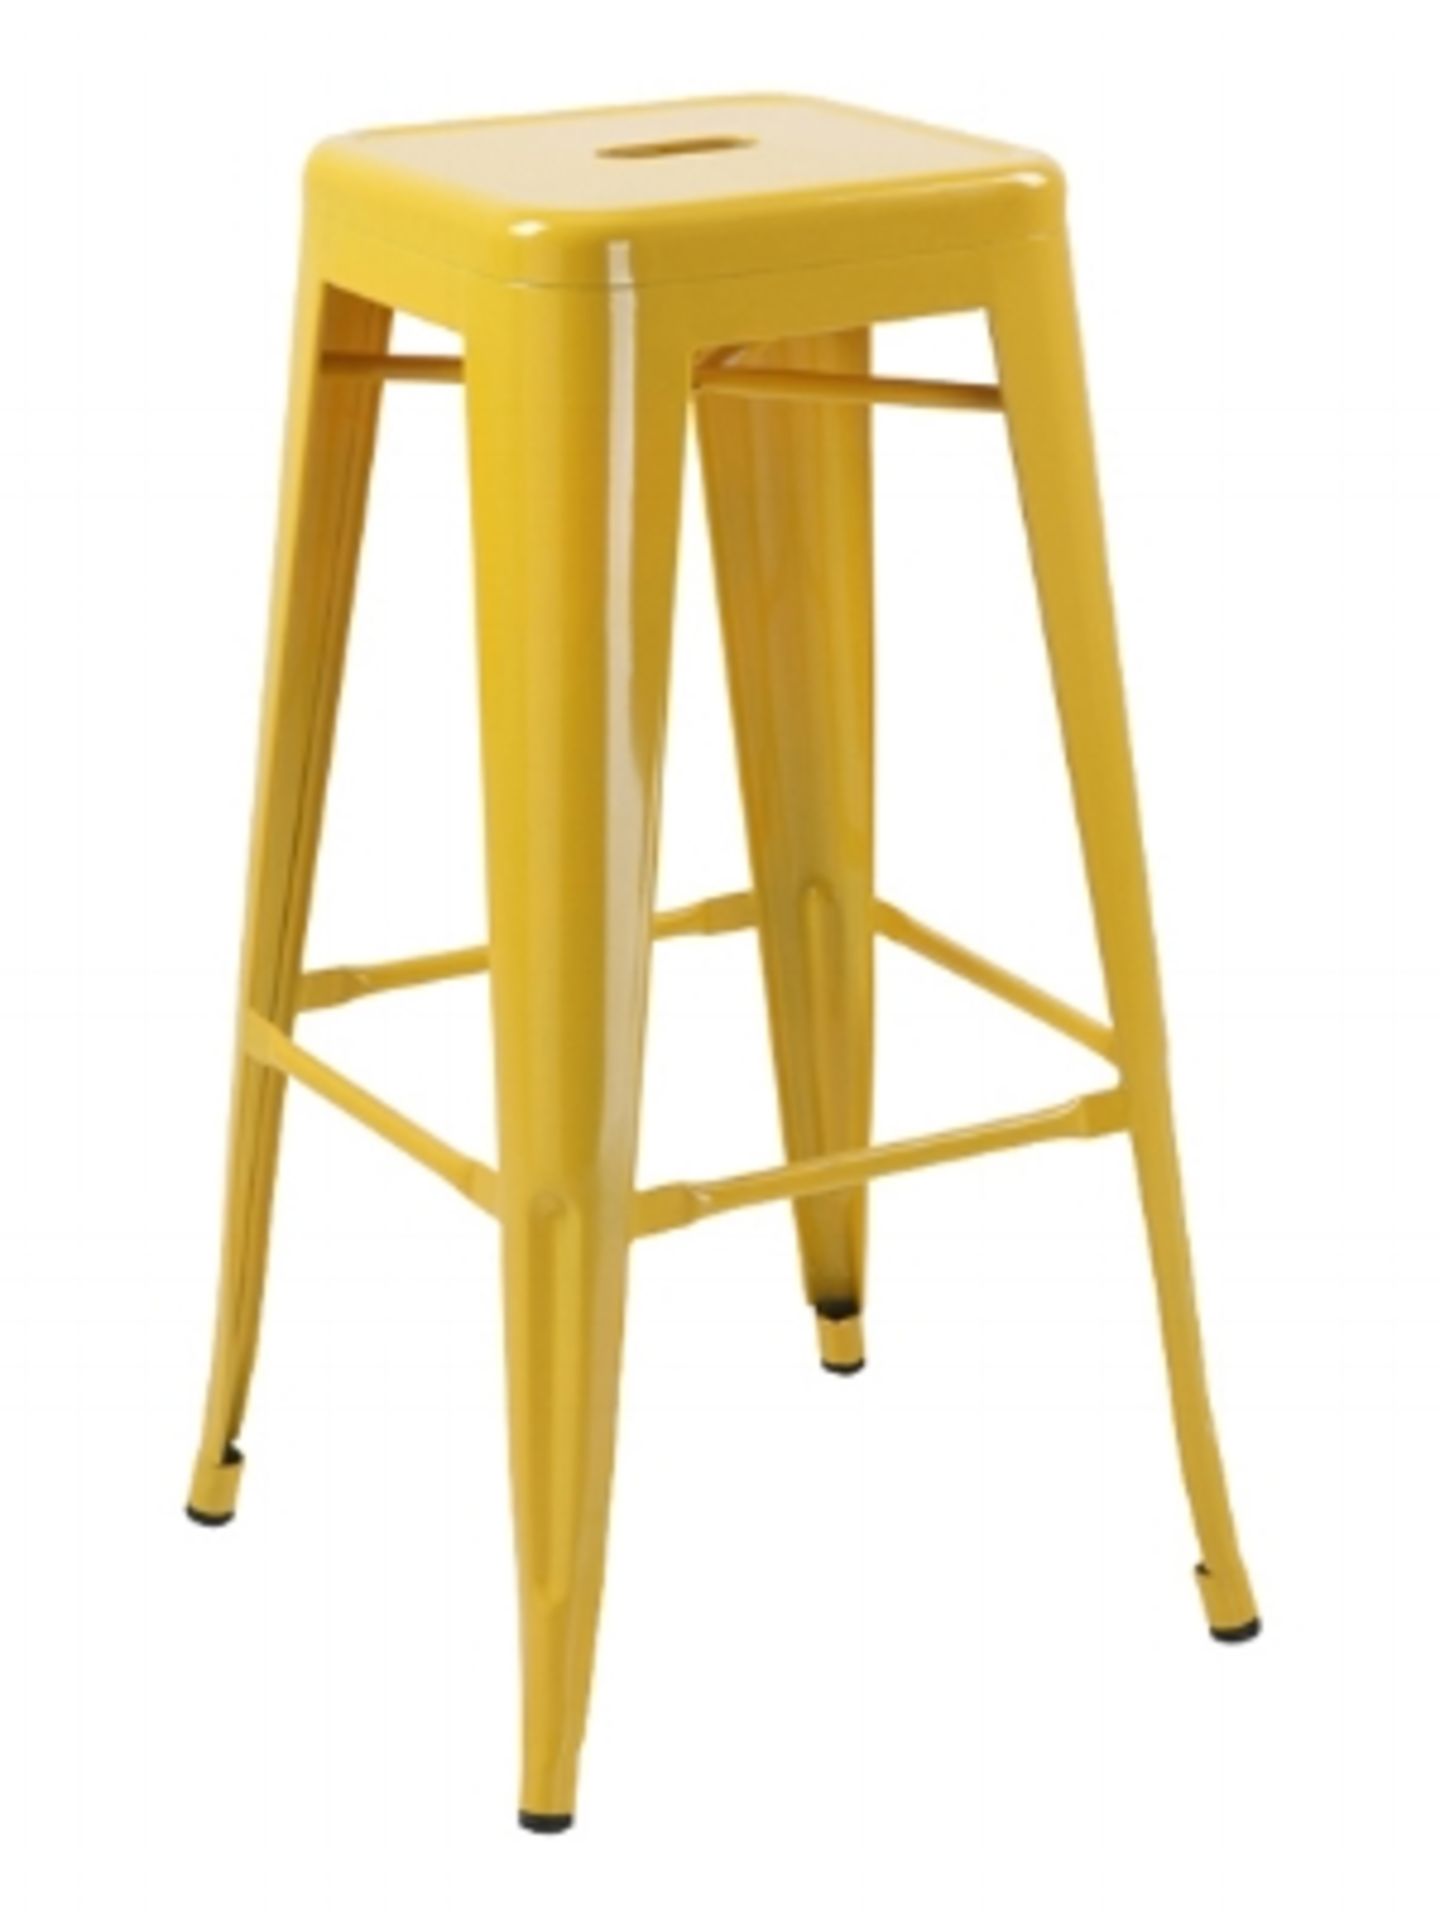 Manhattan Bar stool without back- Yellow, T-5046Y, 9 boxes with 4 each, 36 total